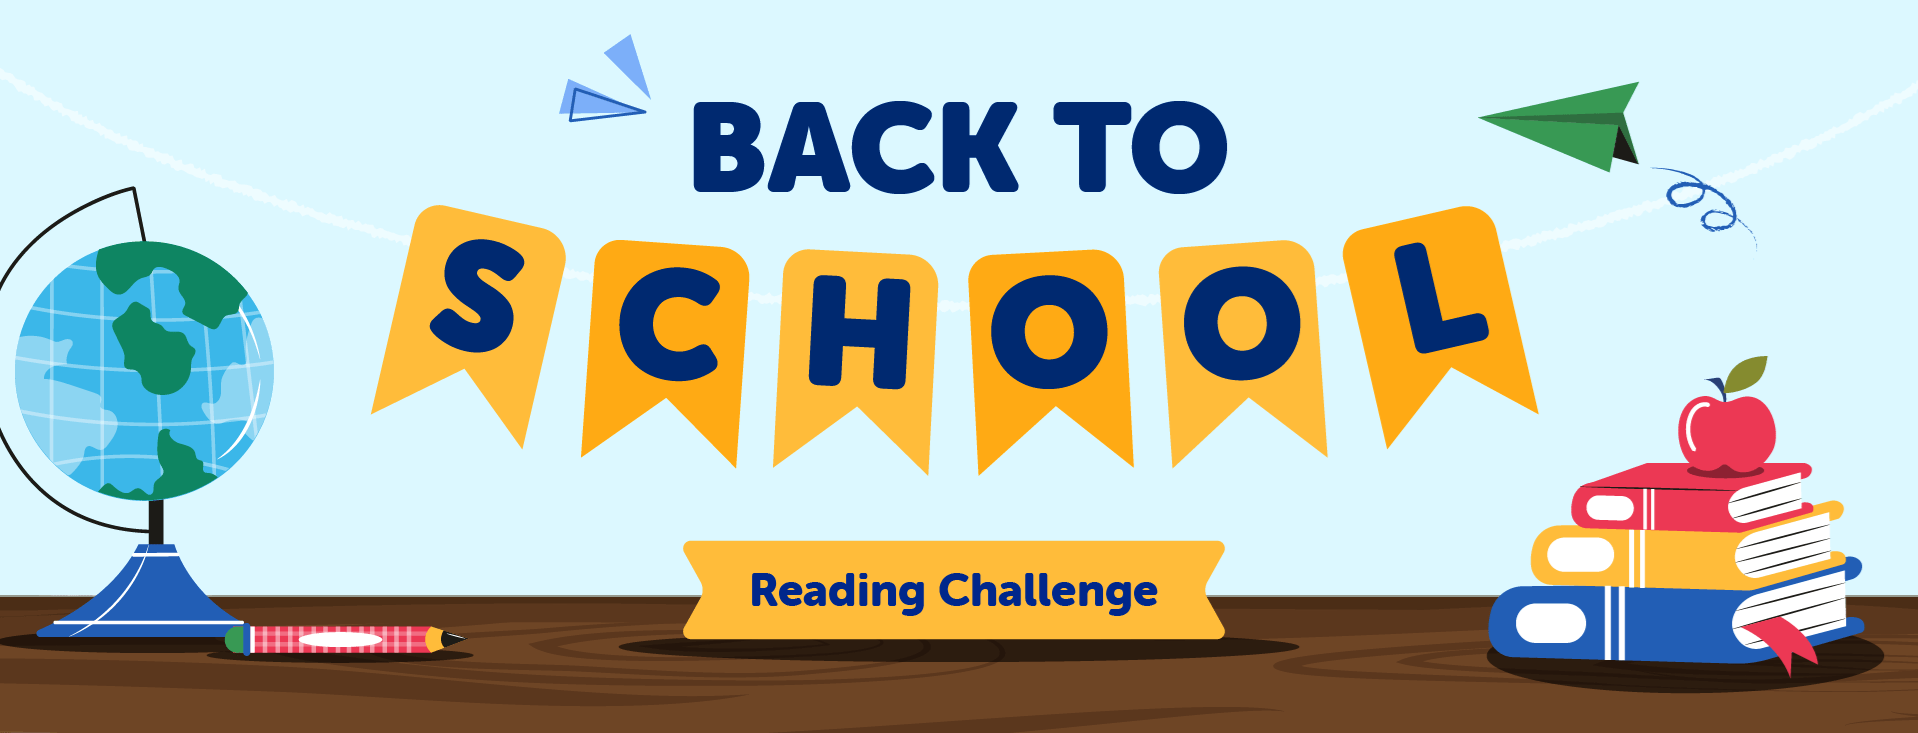 Back to School Reading Challenge banner